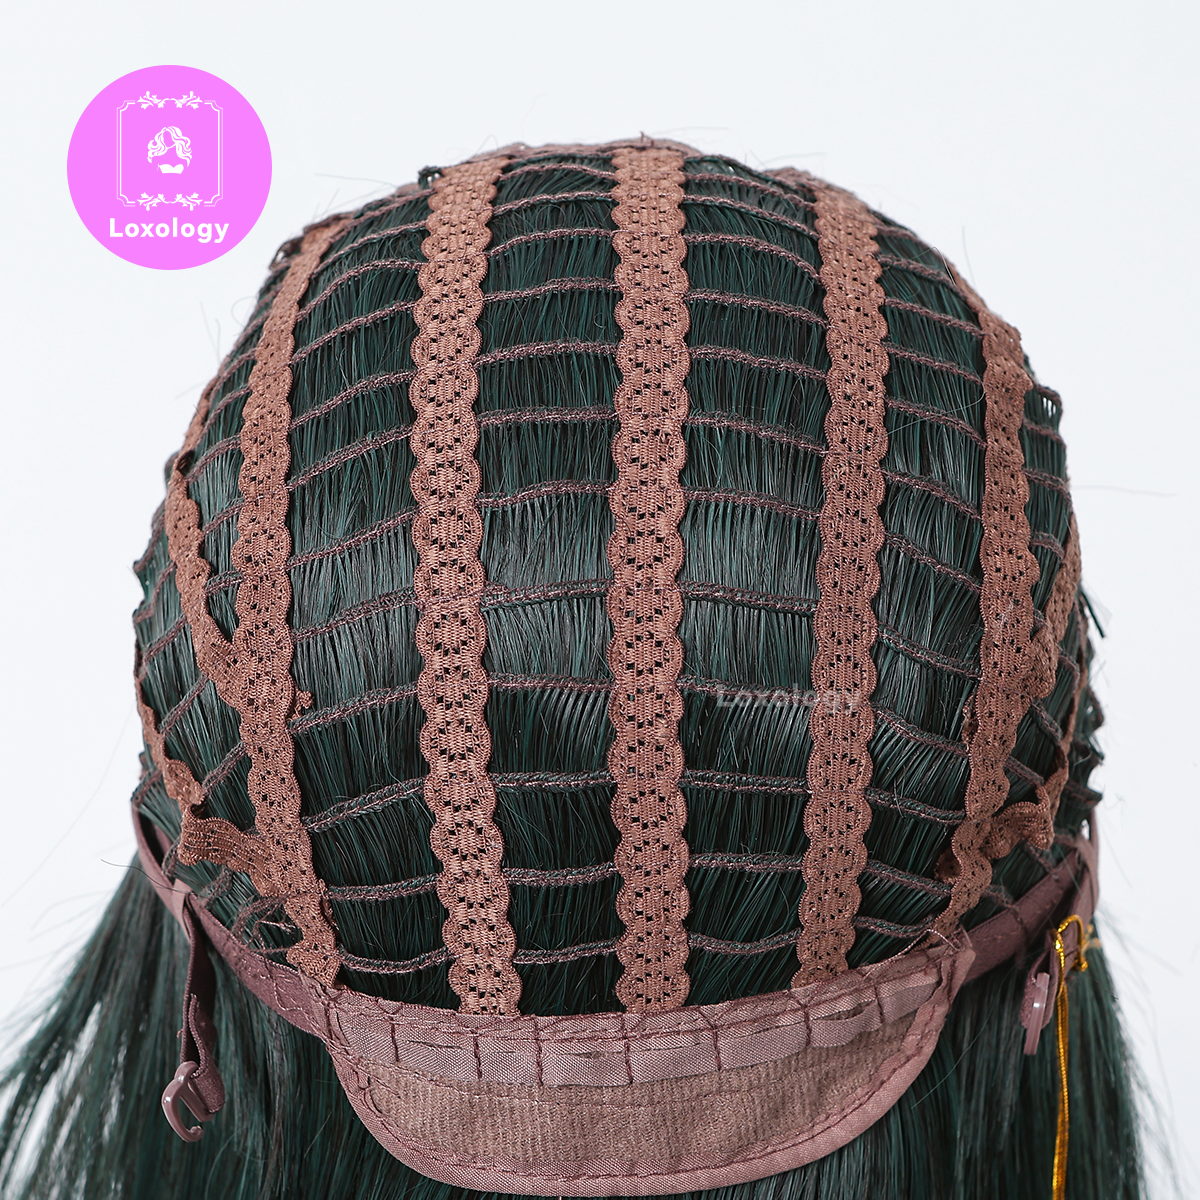 【Flora】Loxology | 28 inch long straight dark green synthetic wig women's wig with bangs